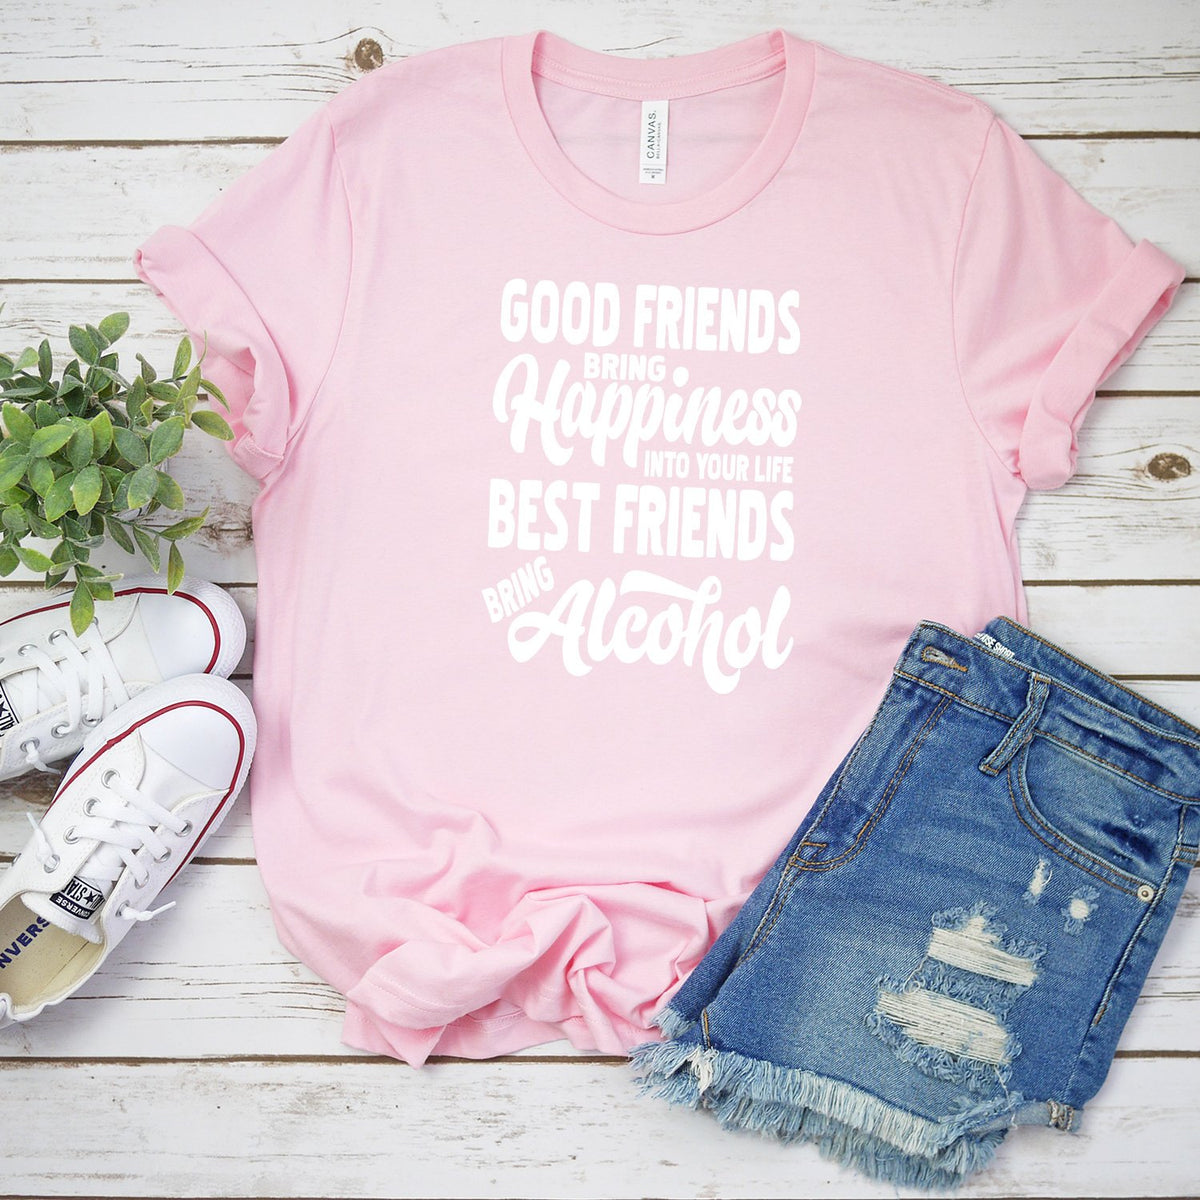 Good Friends Bring Happiness into Your Life Best Friends Bring Alcohol - Short Sleeve Tee Shirt